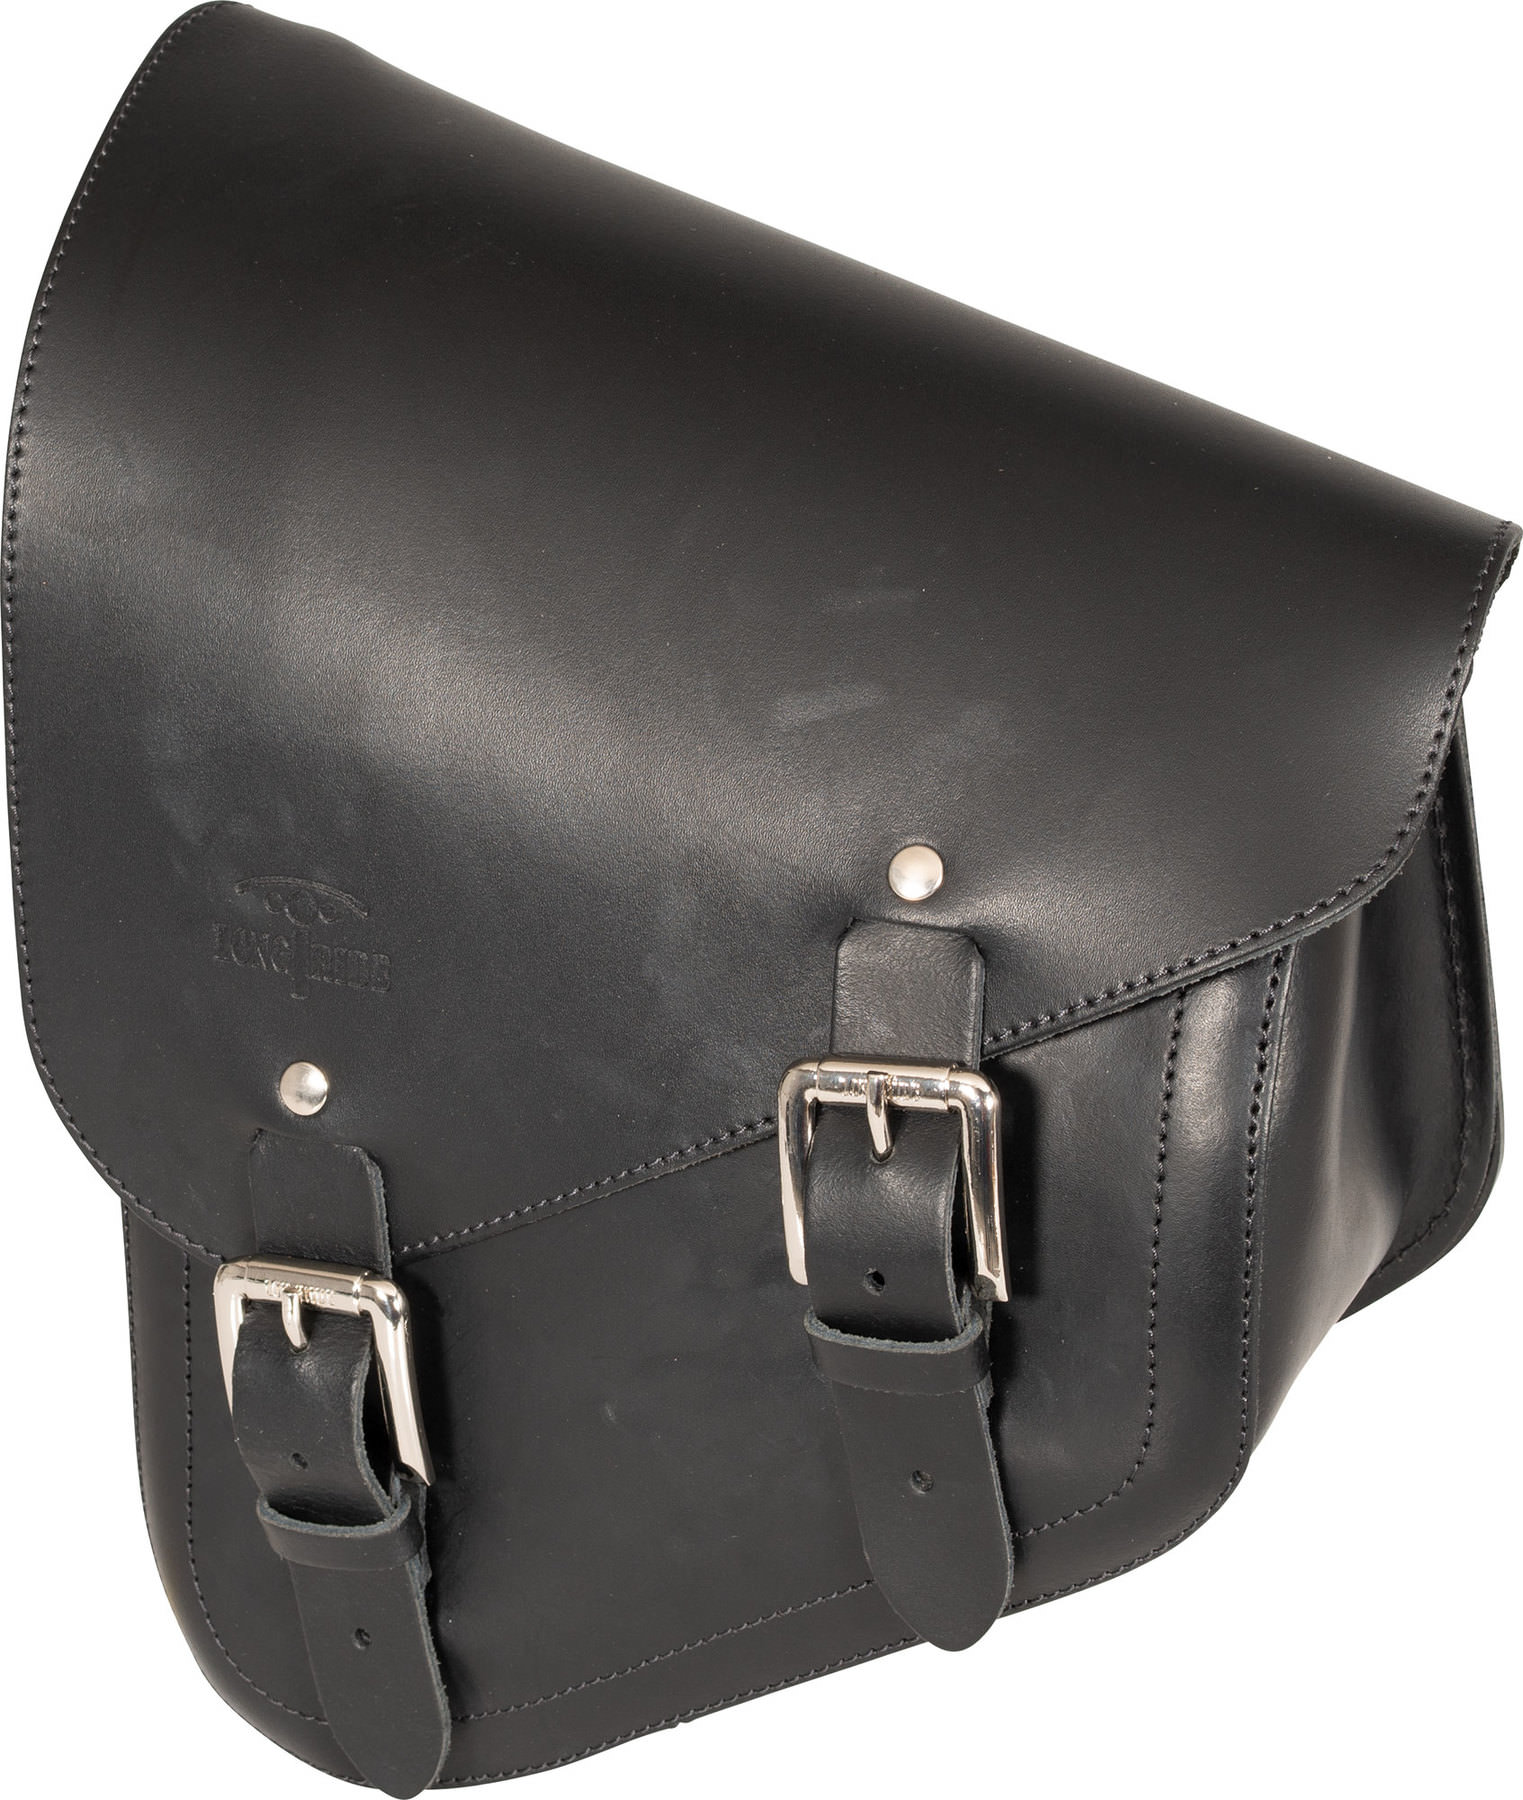 Buy the Harley Davidson Black Leather Small Pouch Flap Crossbody Bag